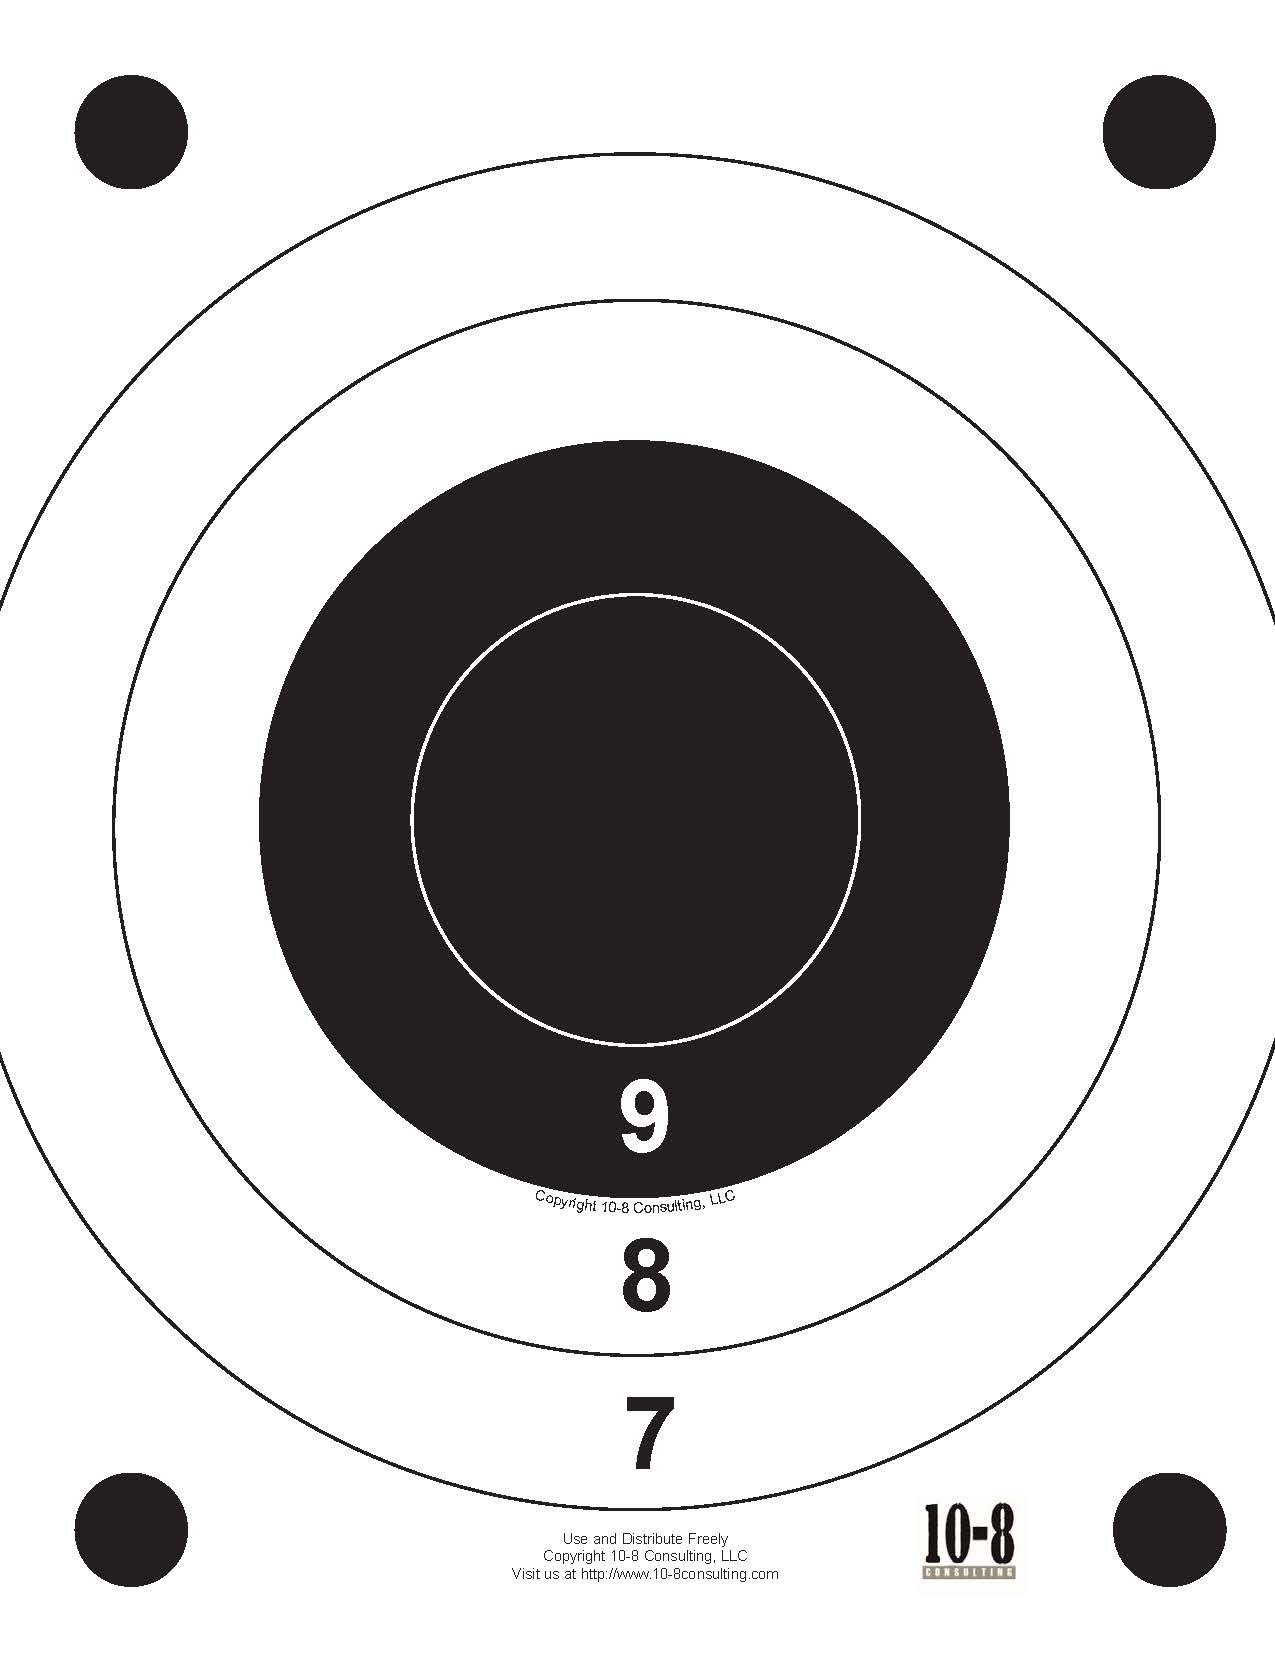 targets-modern-service-weapons